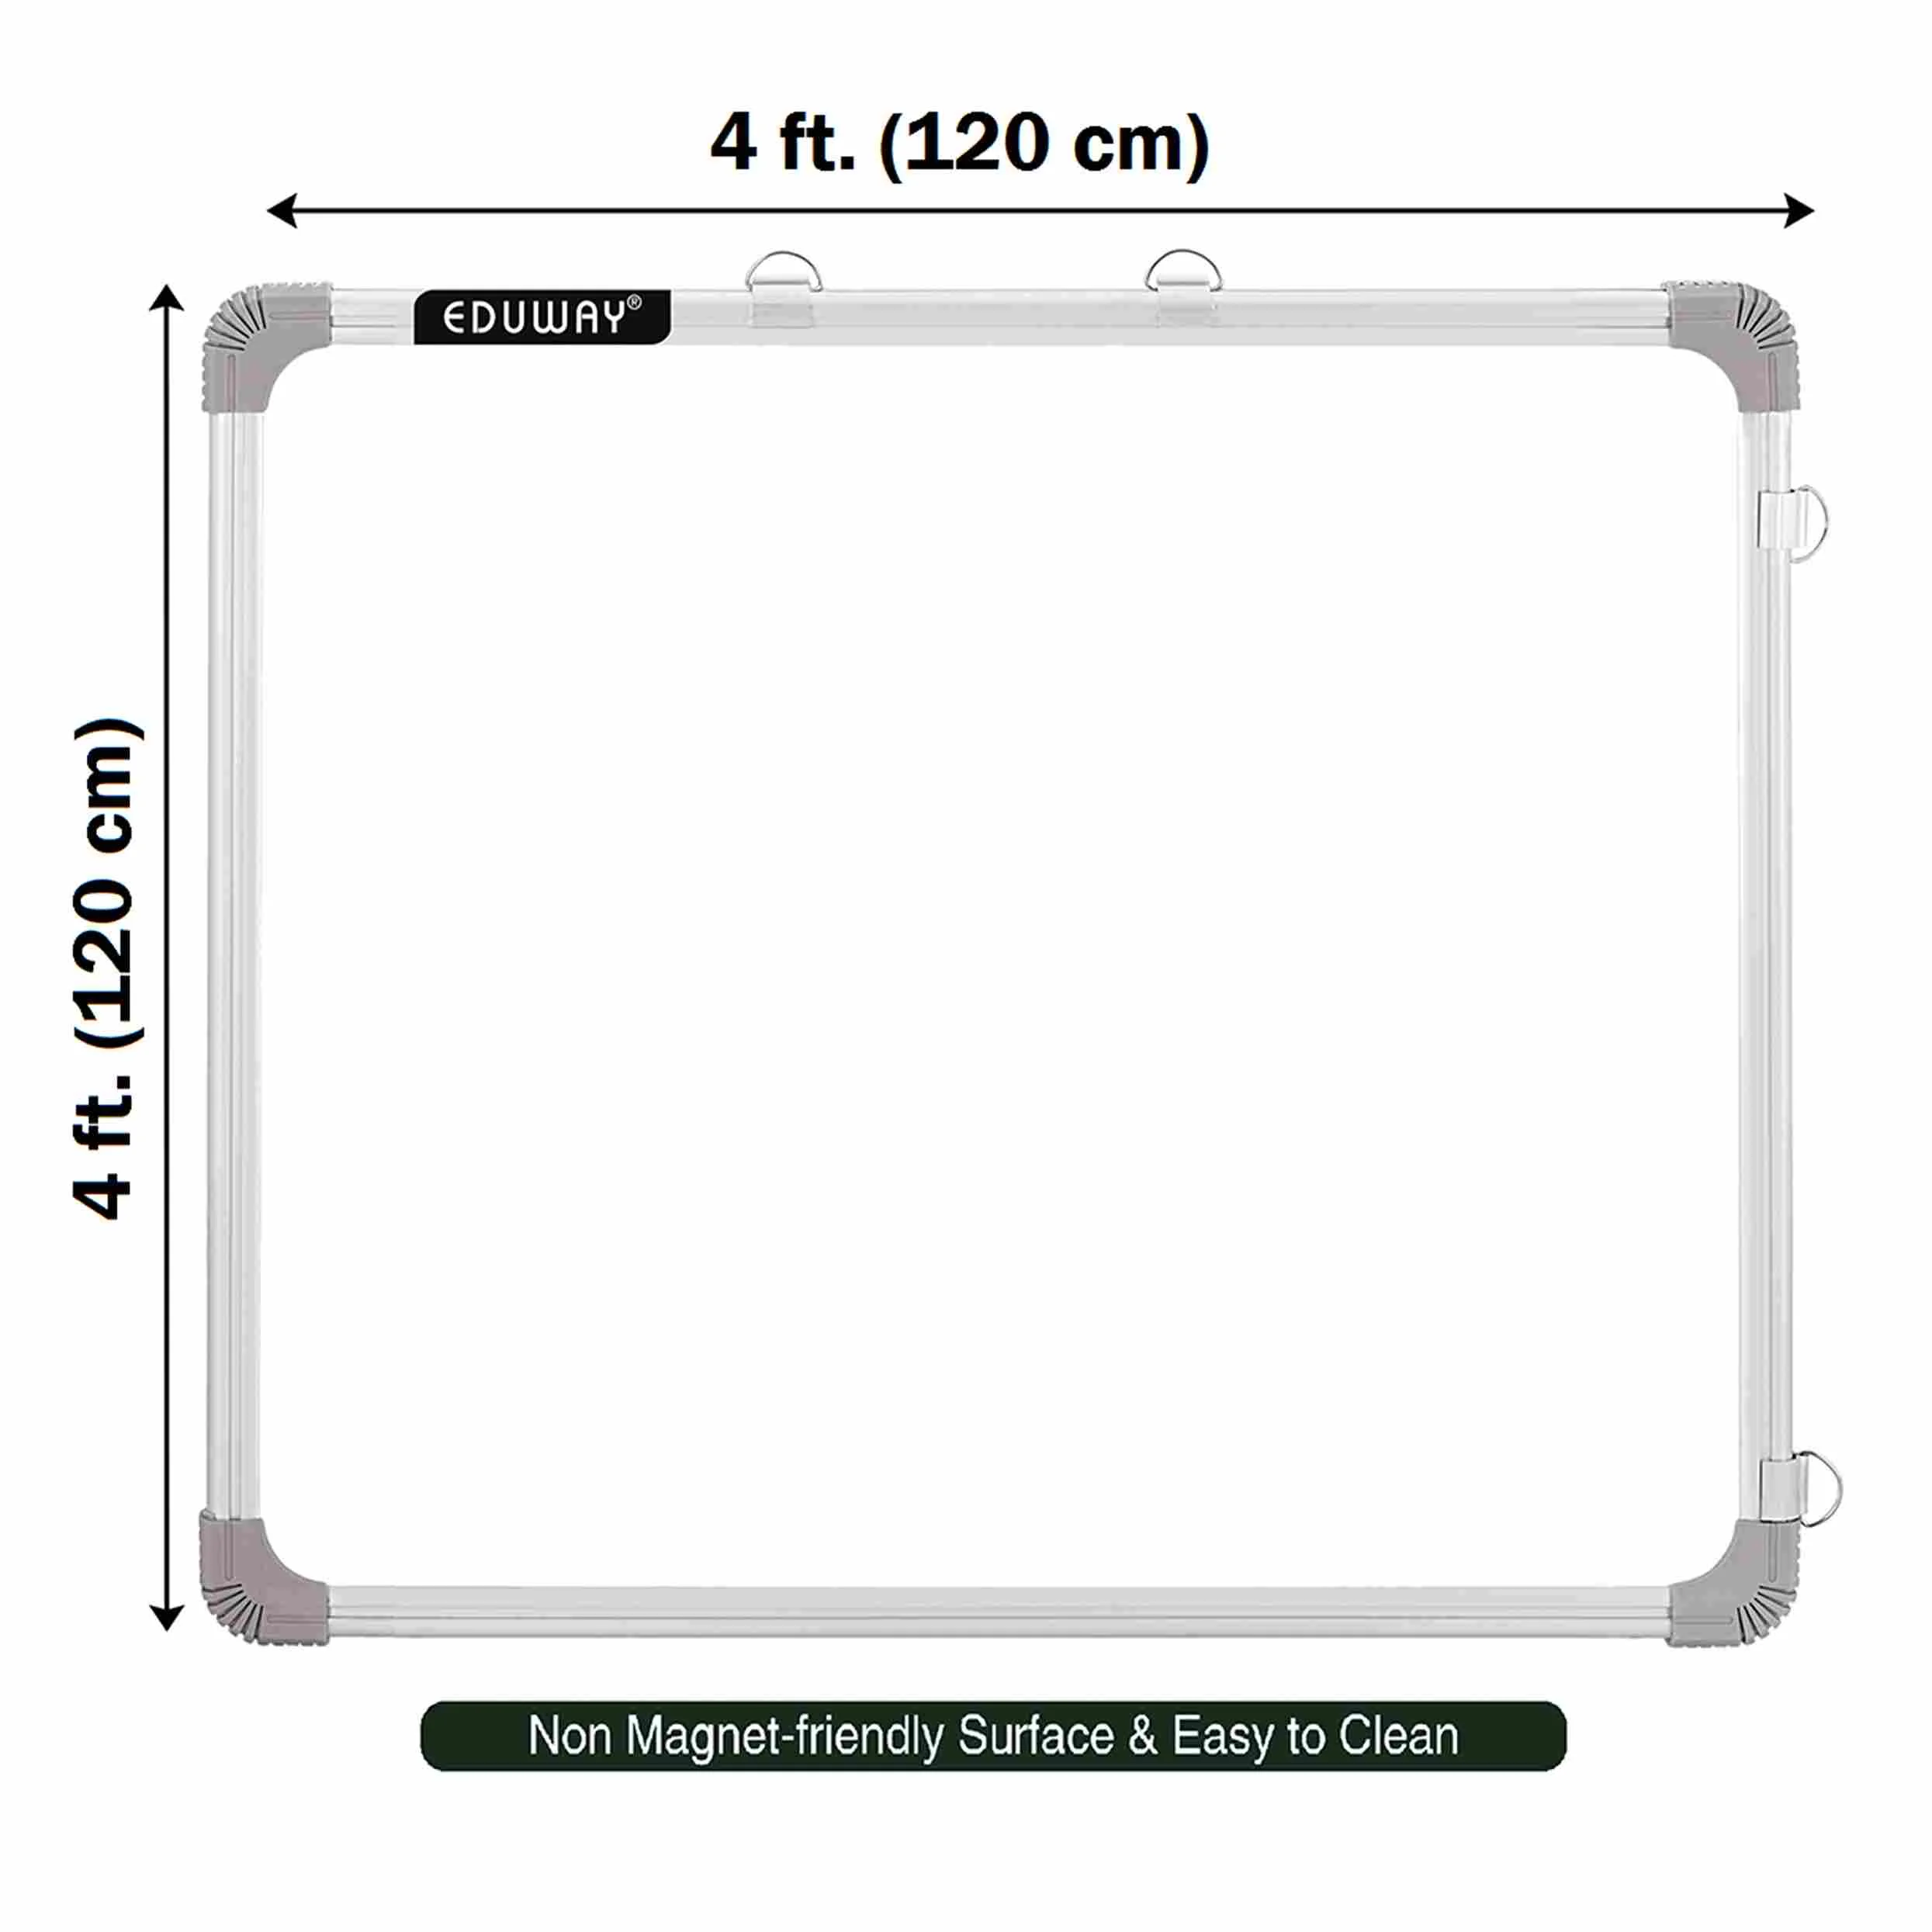 whiteboard 4x4 ft. front size charts